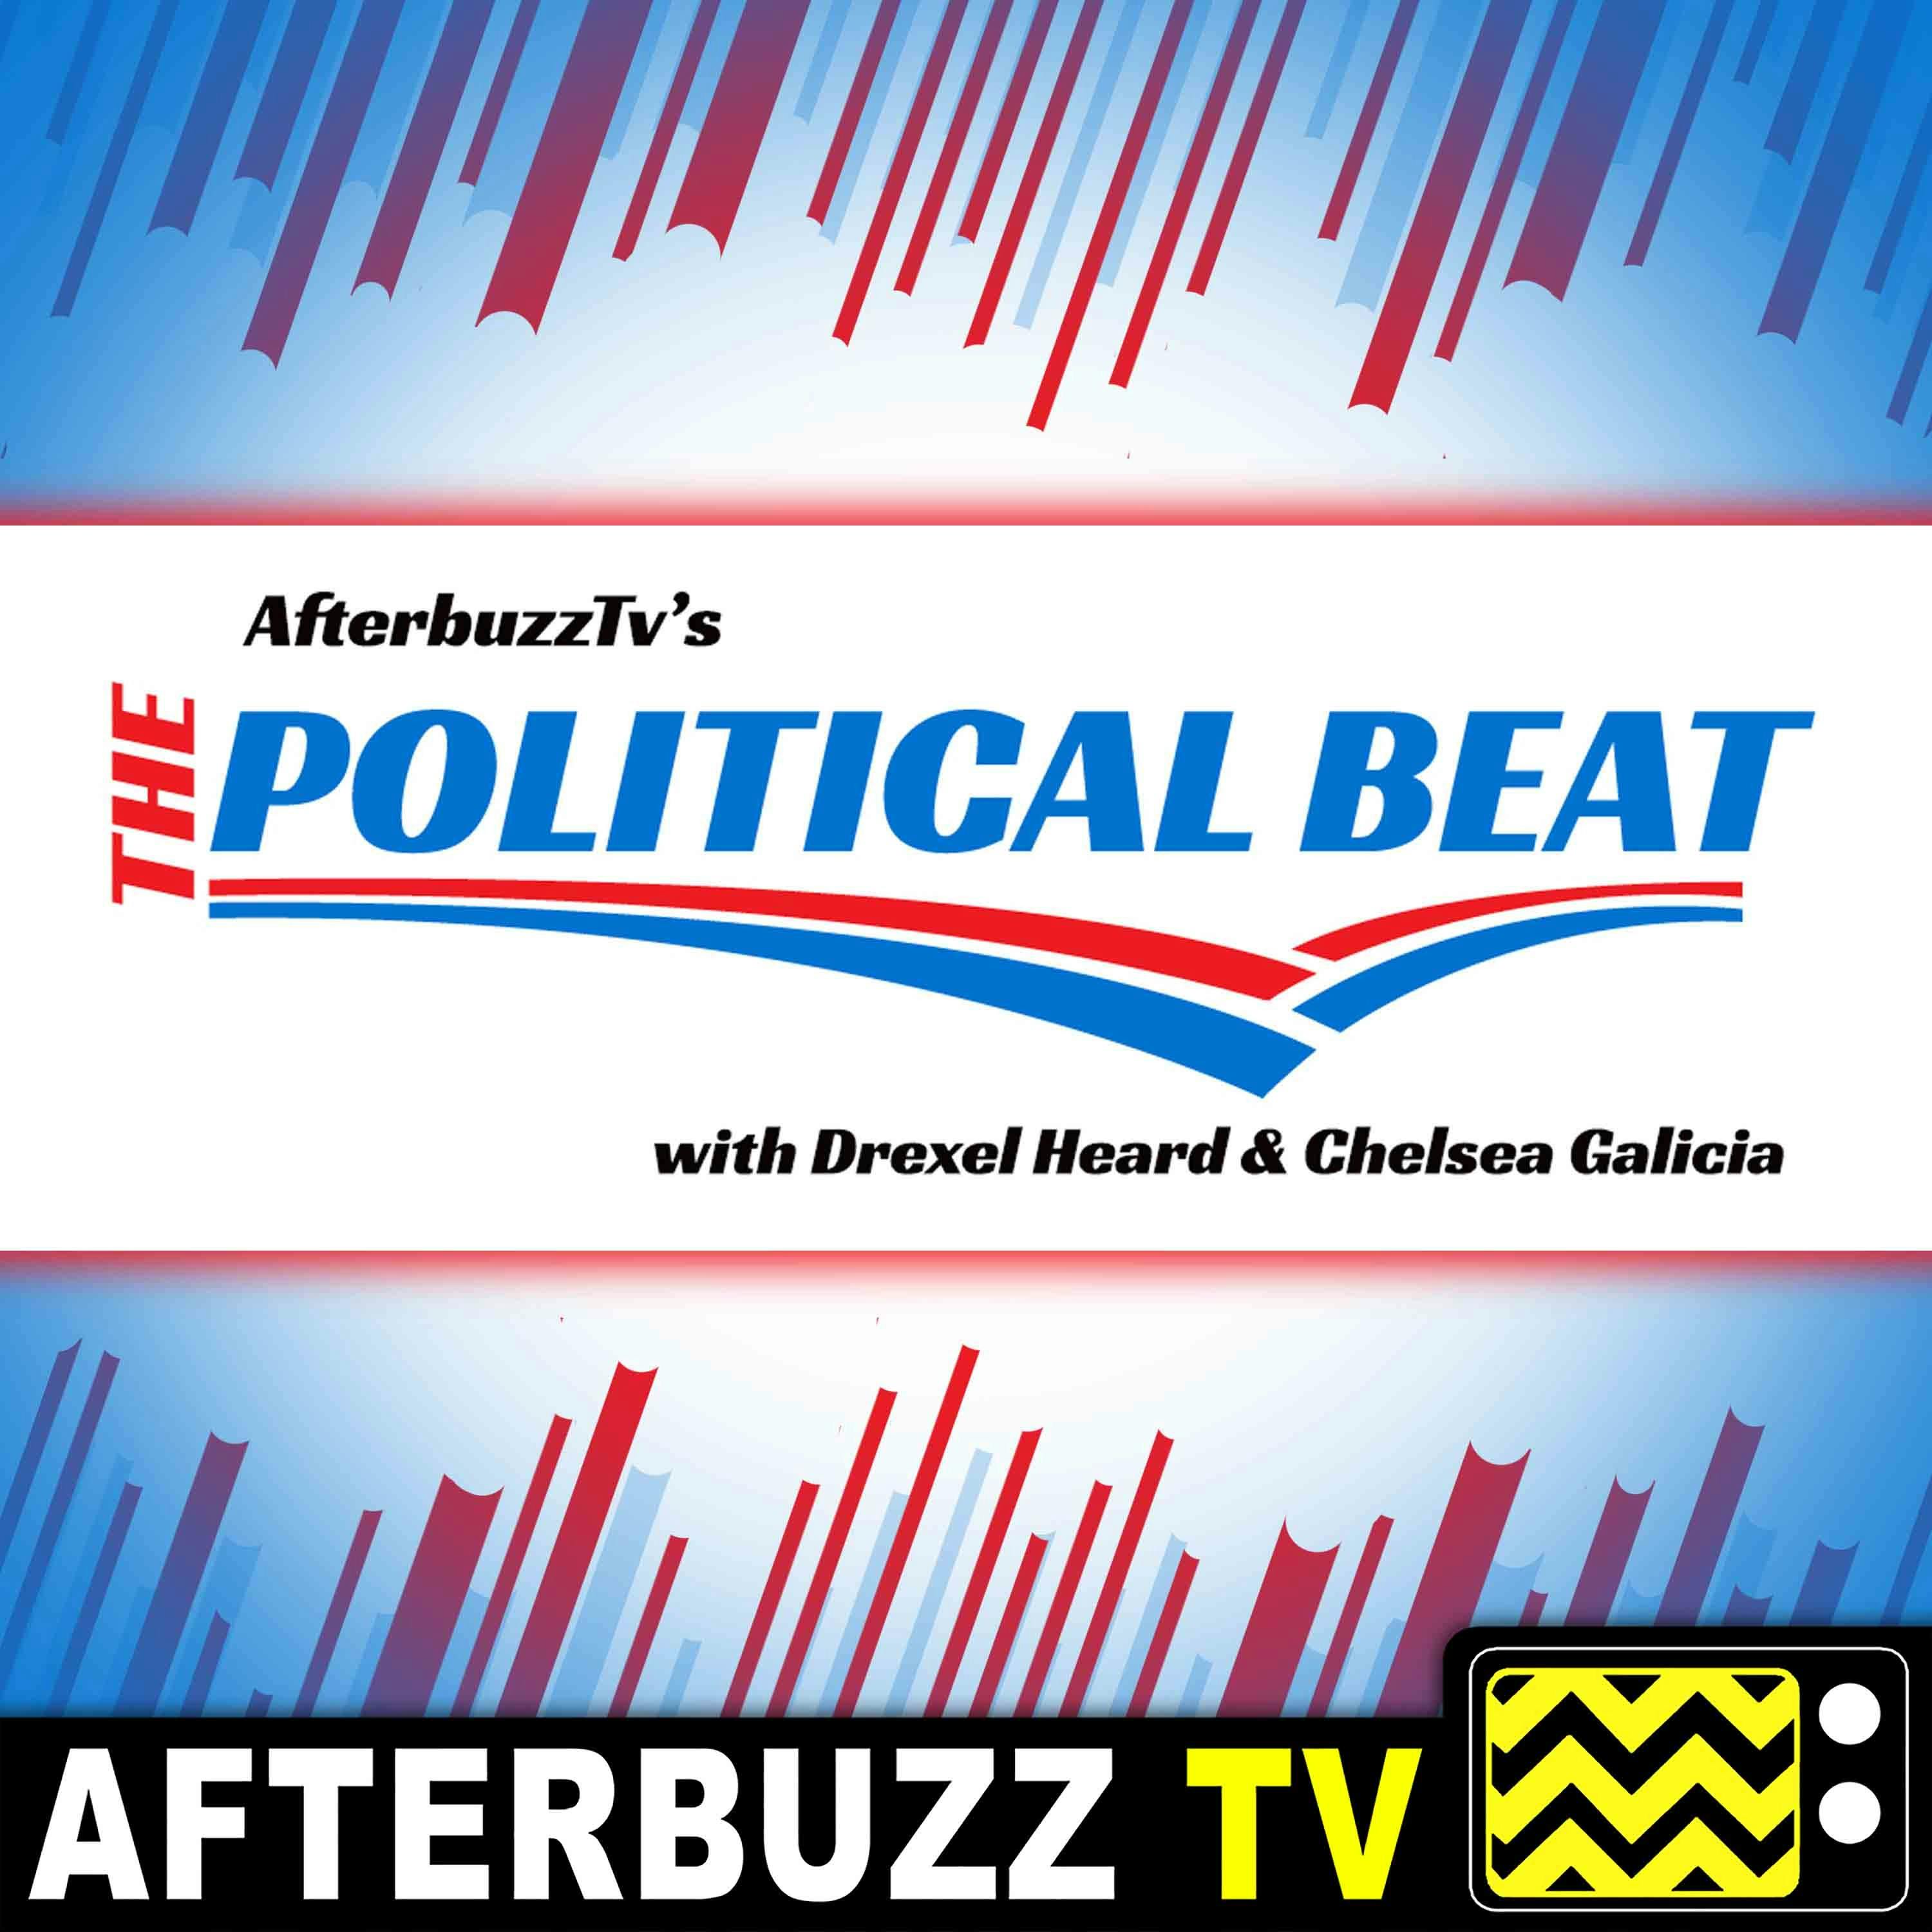 What Did I Miss? – California Laws, Fusion GPS, 2018 Races to Watch | AfterBuzz TV’s The Political Beat